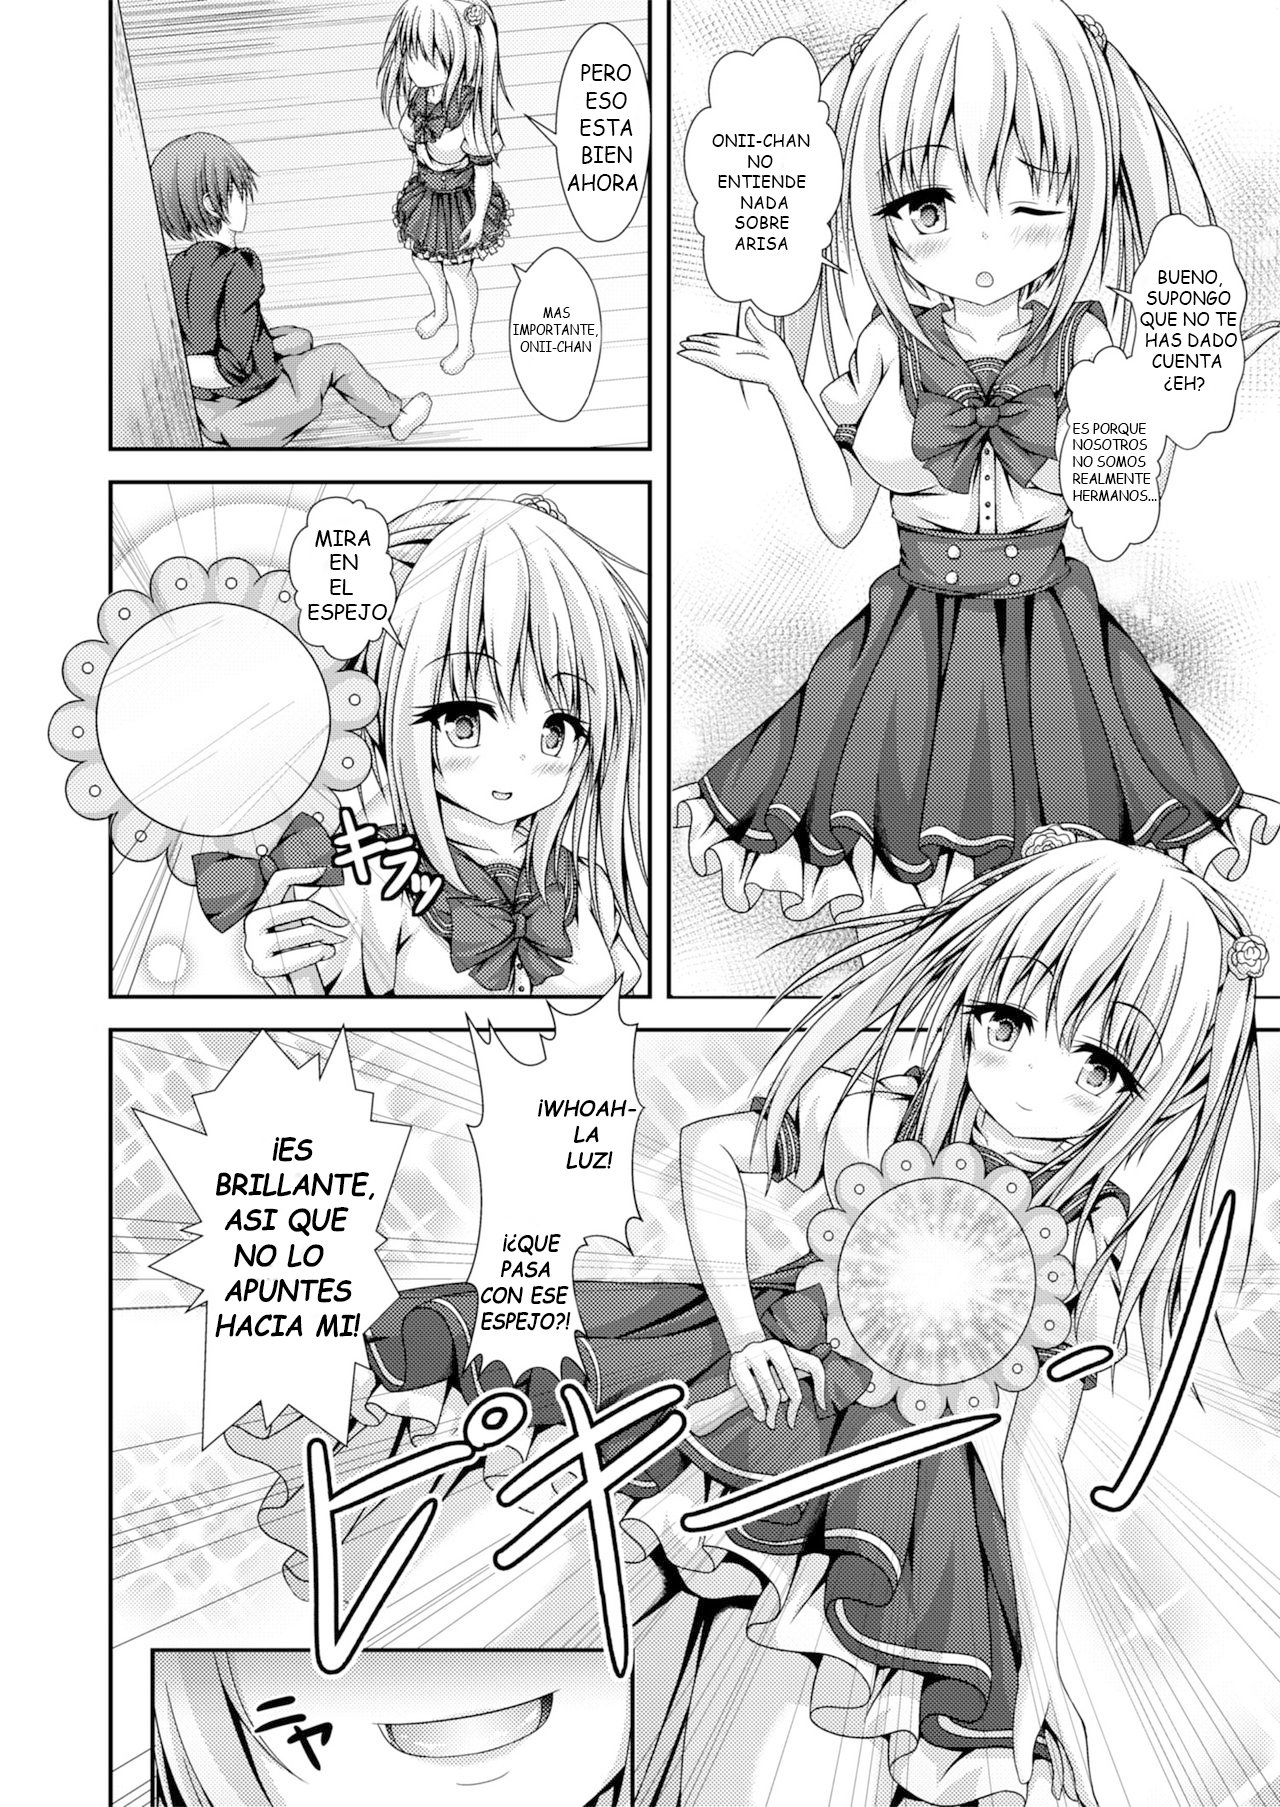 Switching Bodies With a Lewd Sister - 2